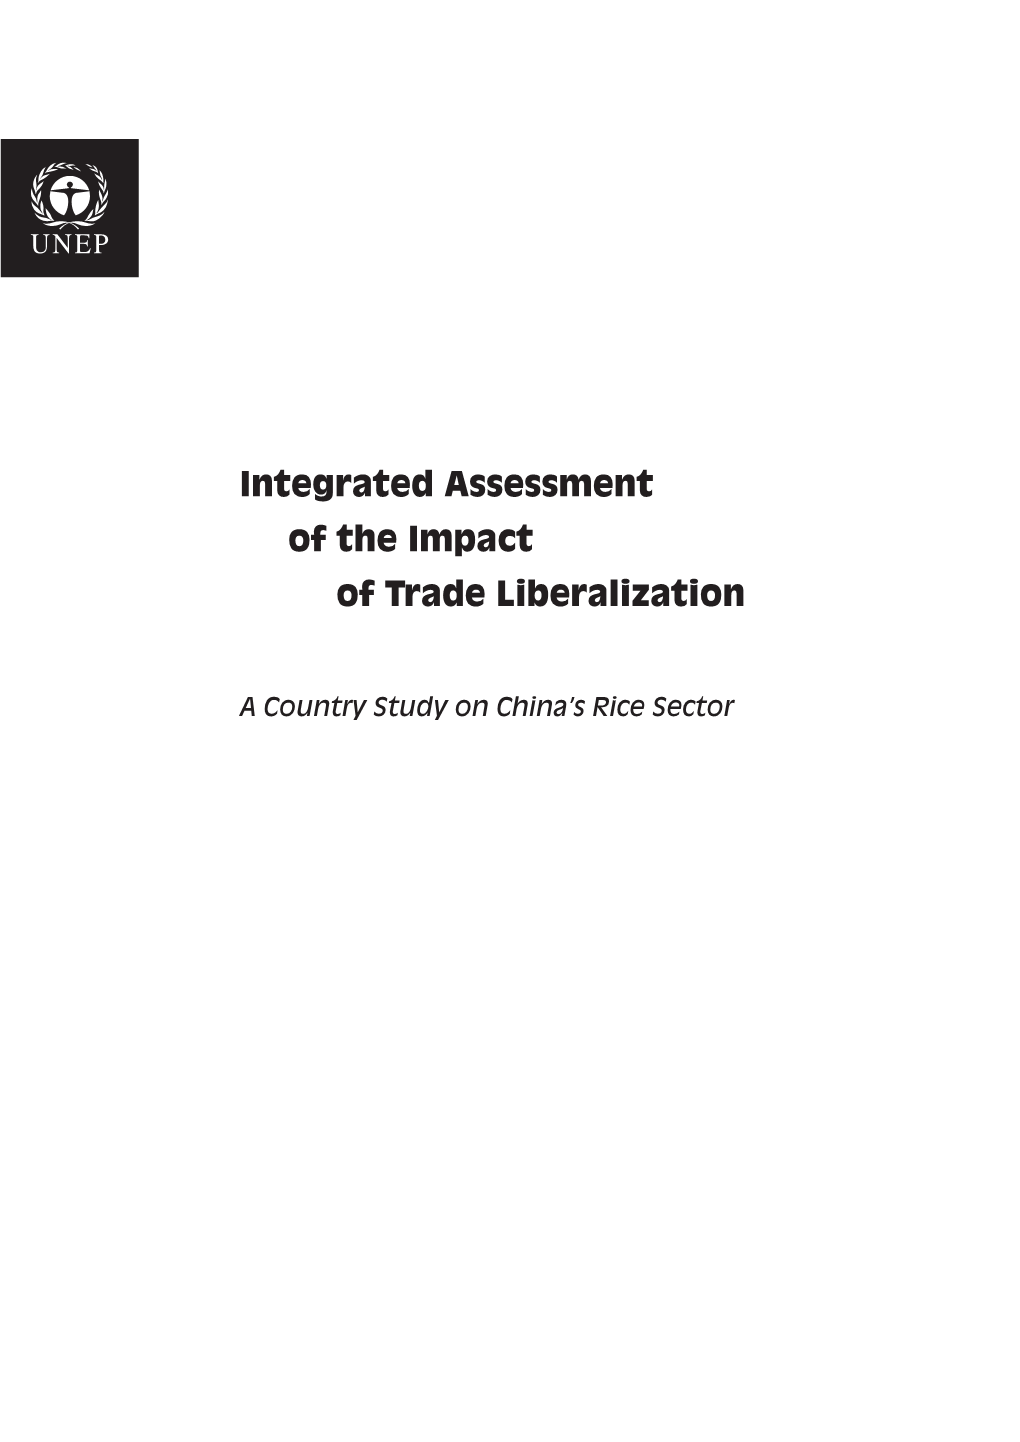 Integrated Assessment of the Impact of Trade Liberalization